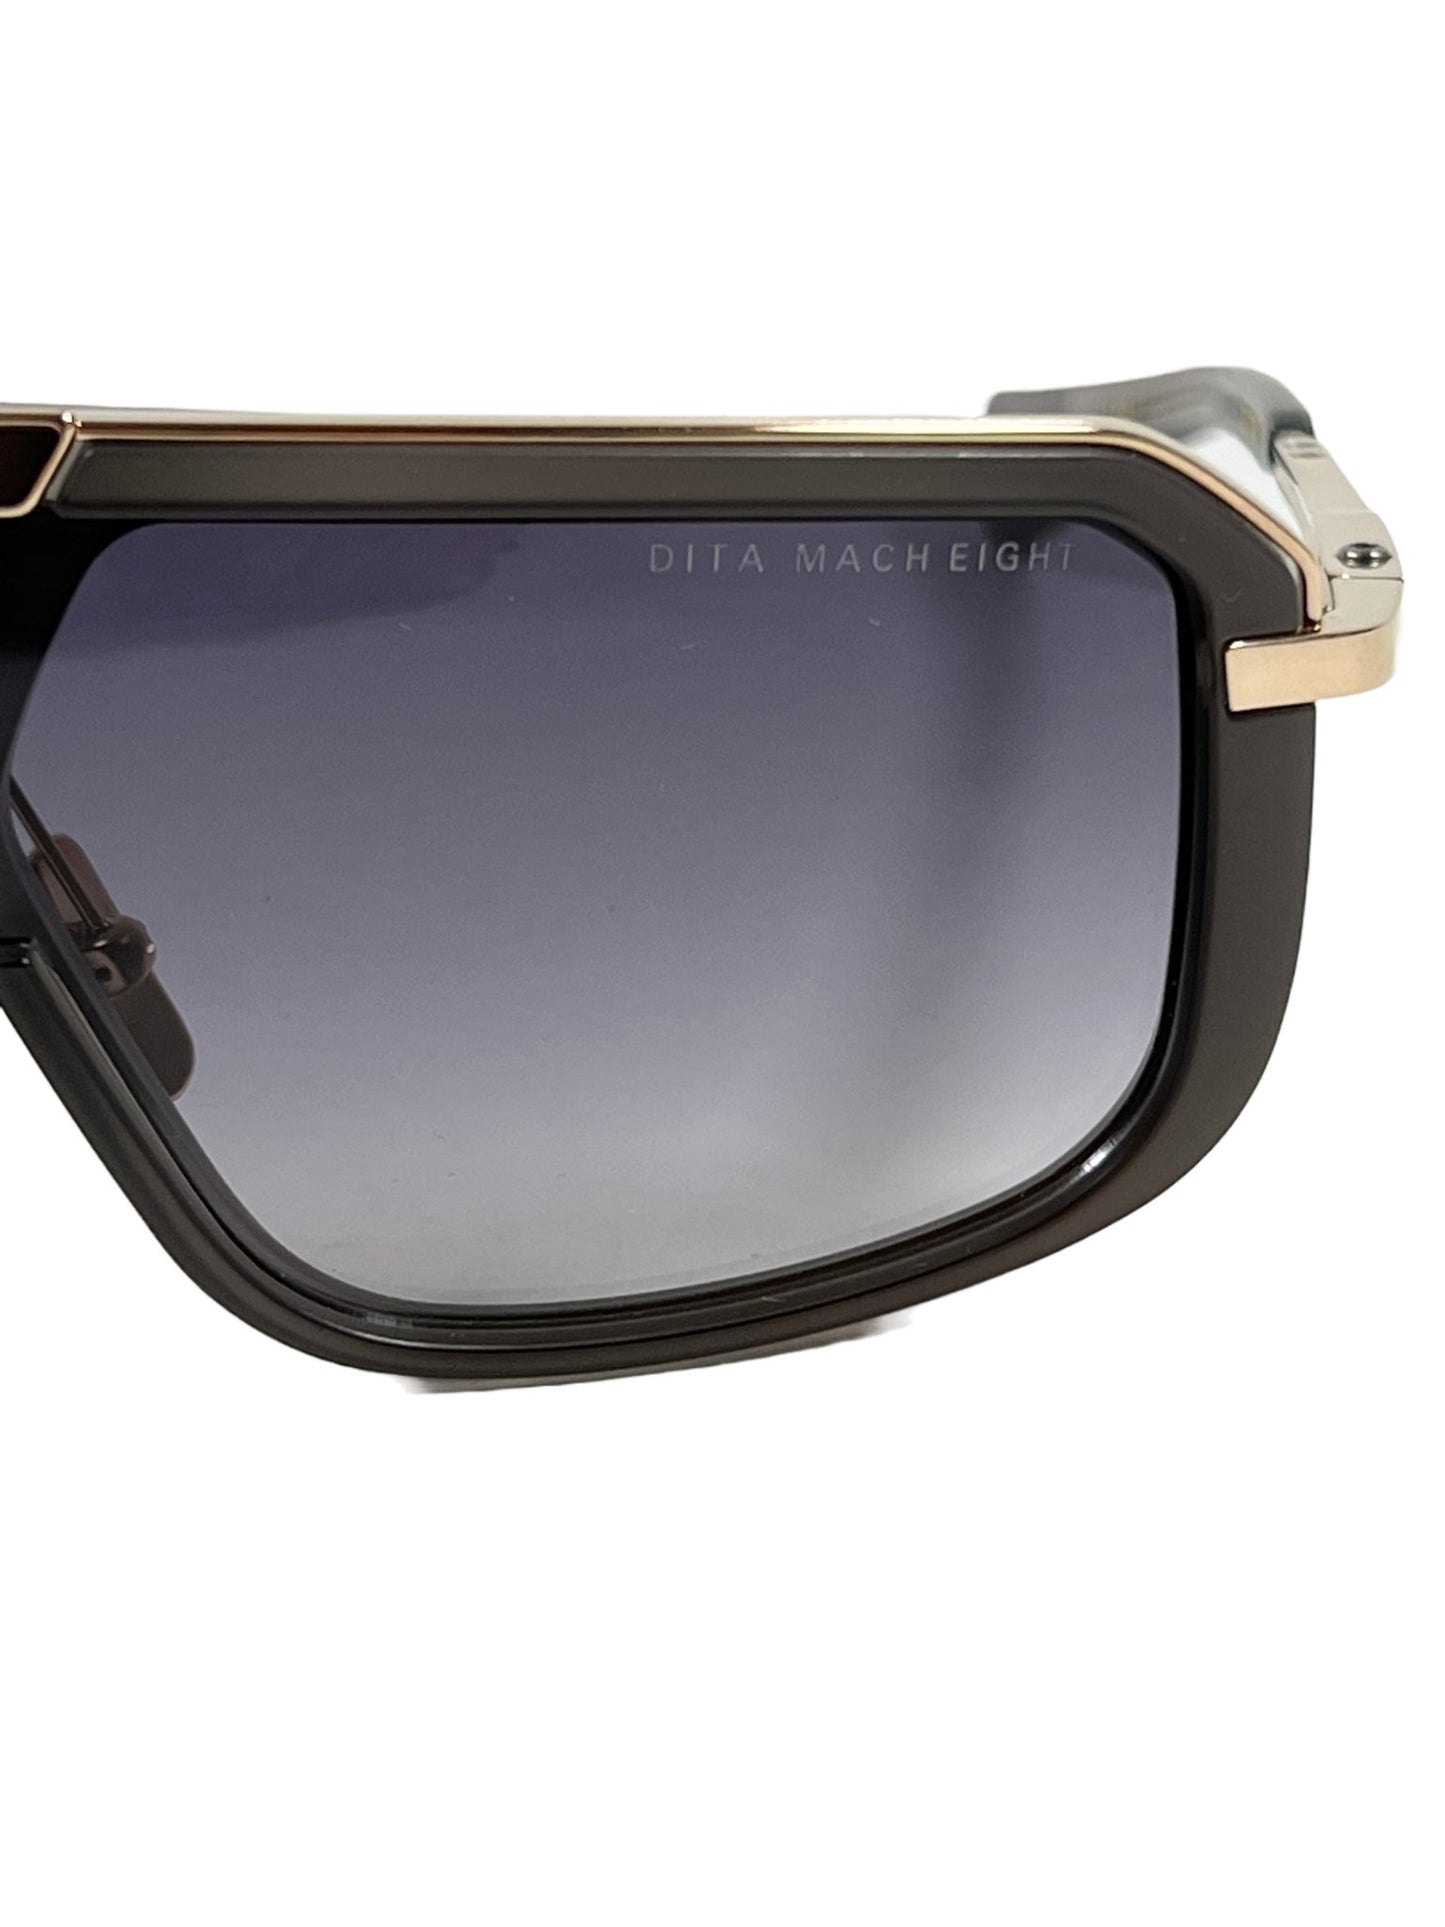 A pair of DITA DITA MACH-EIGHT DTS400-A-02 sunglasses with a black frame and gold trim, crafted in Japan.